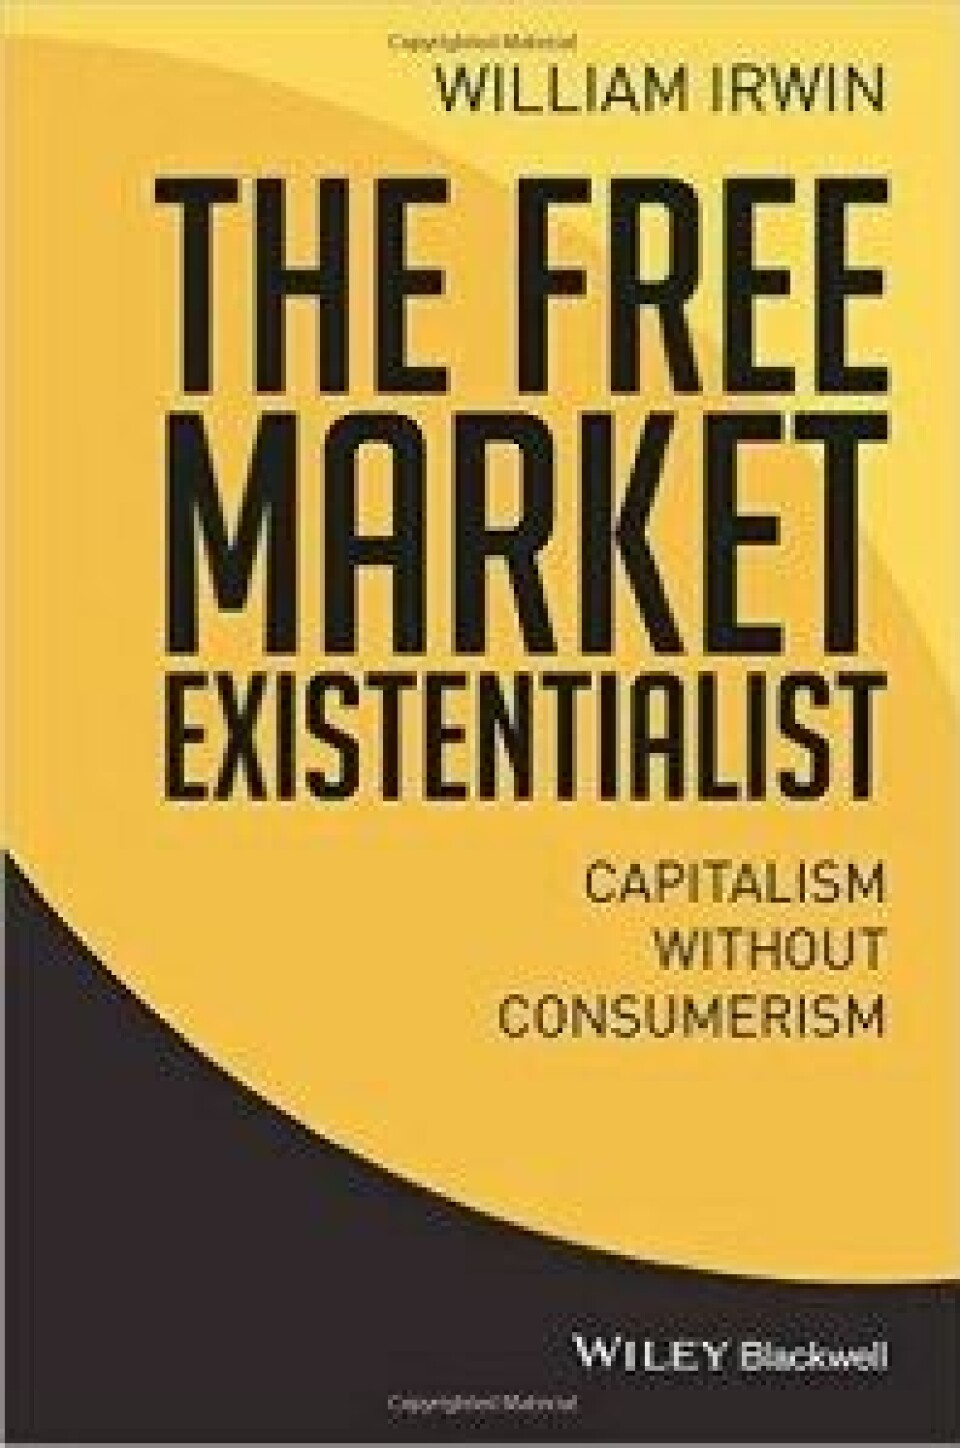 William Irwin, The Free Market Existentialism. Capitalism Without Consumerism. Chisester: Wiley/Blackwell, 2015.